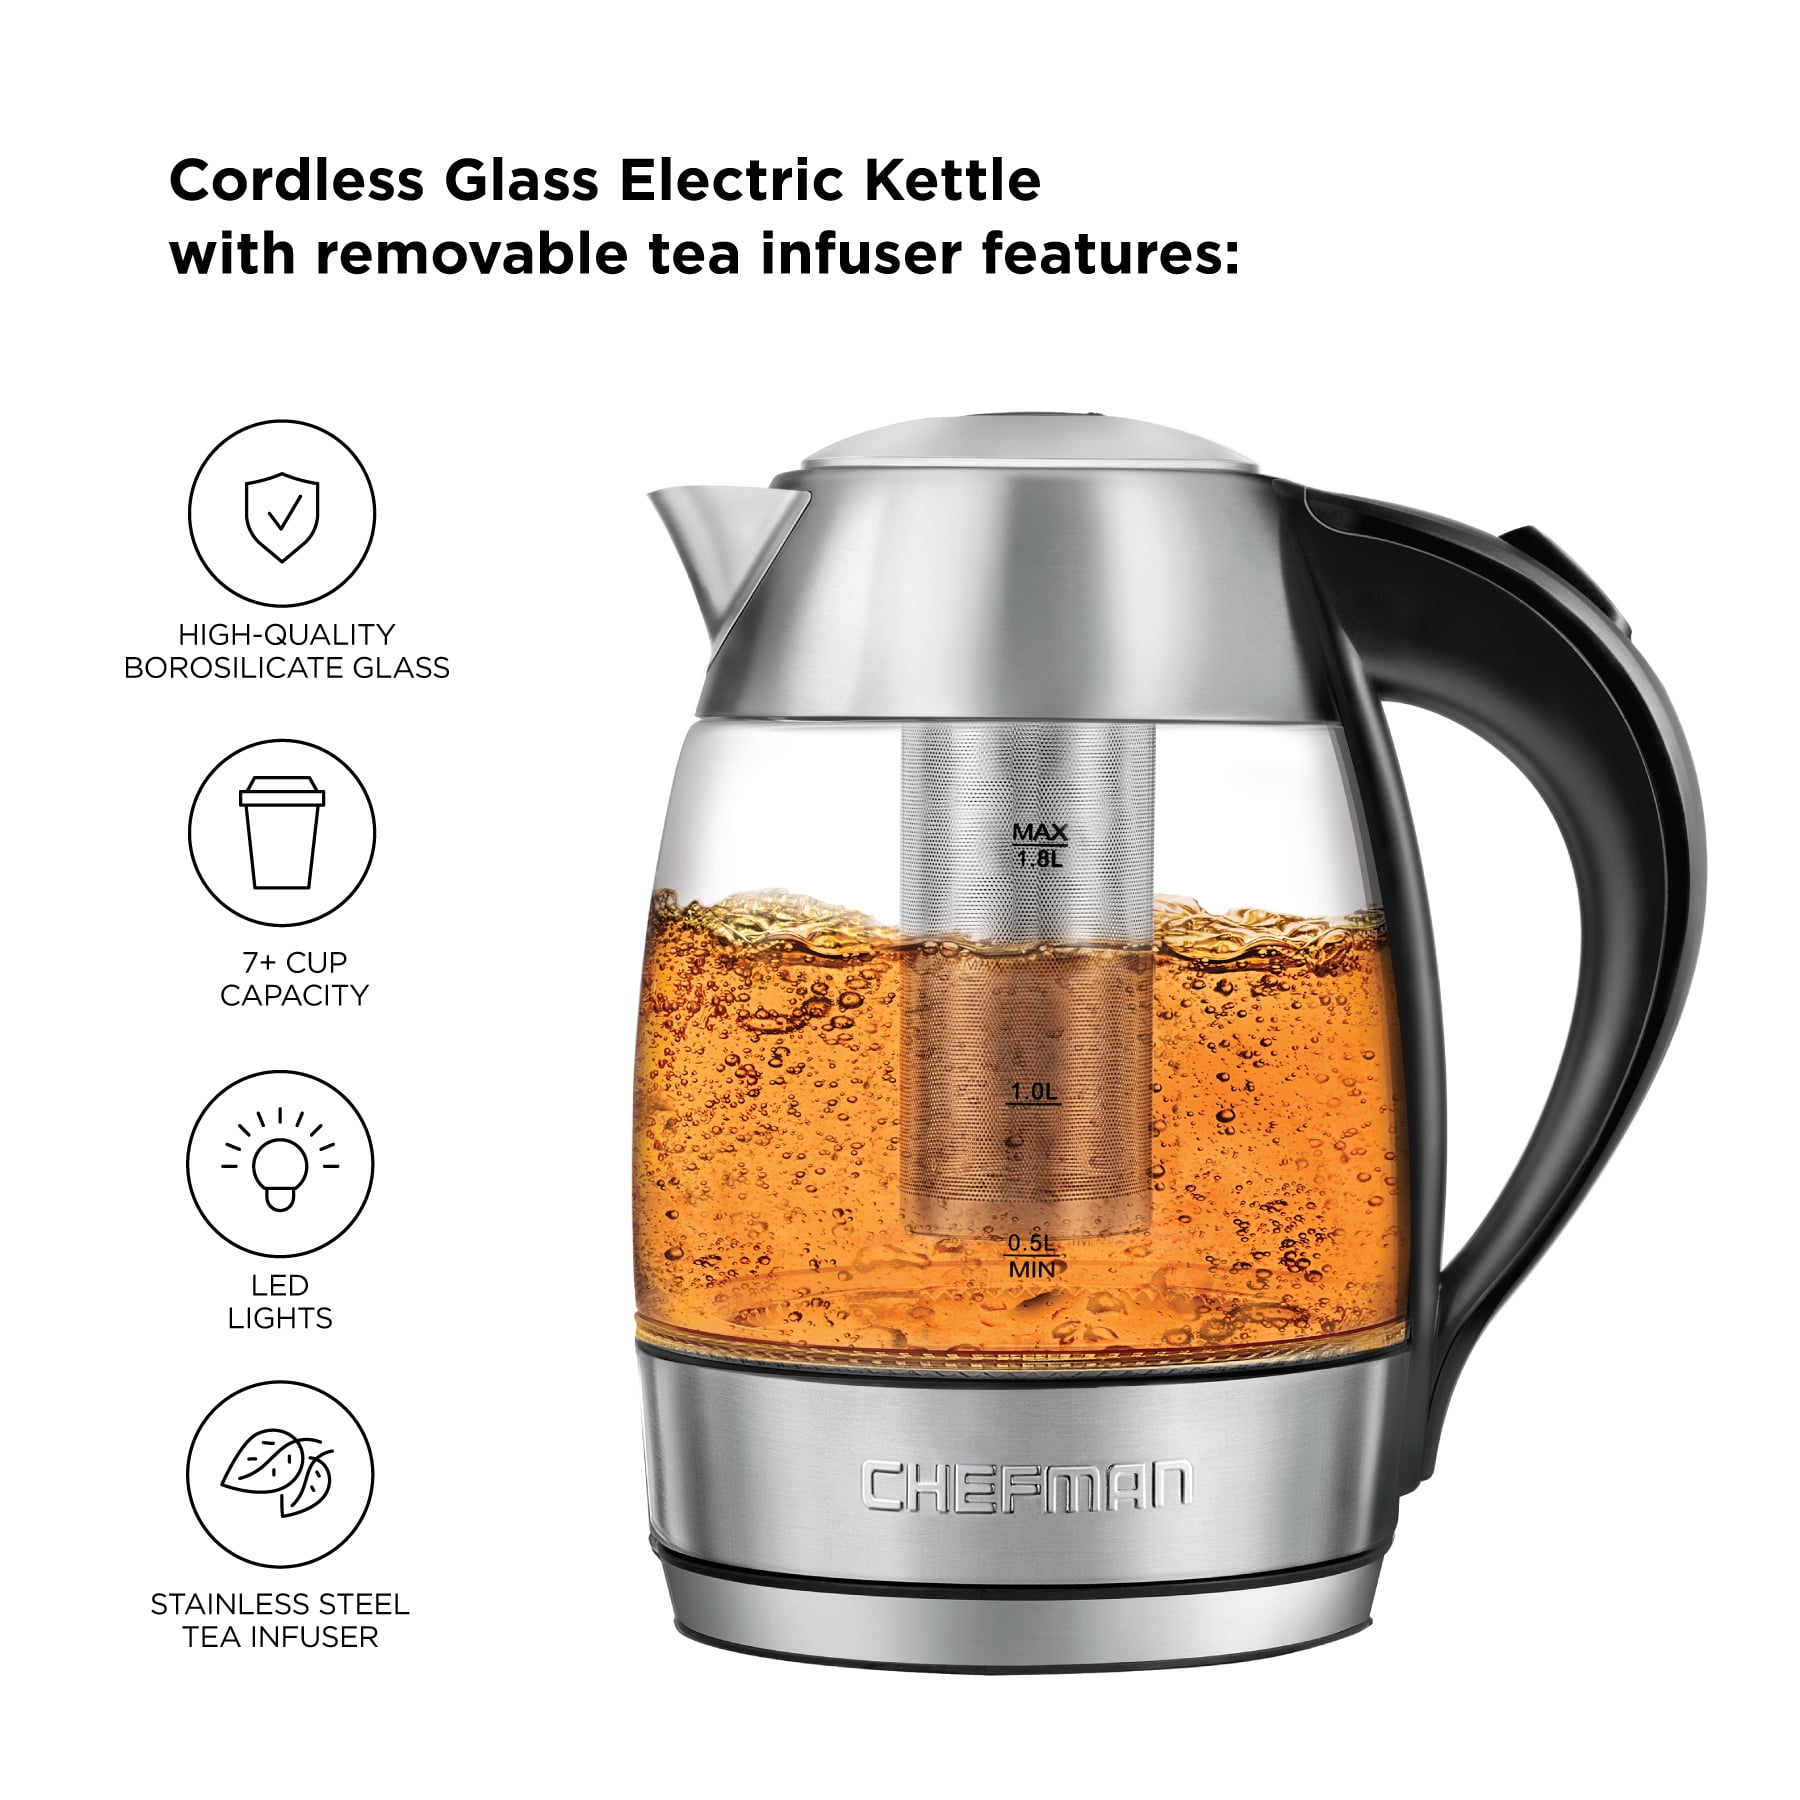 I just leveled up my tea game with this gift from my loving wife! A chefman  electric kettle with a built in infuser. Now i can drink a liter of tea at